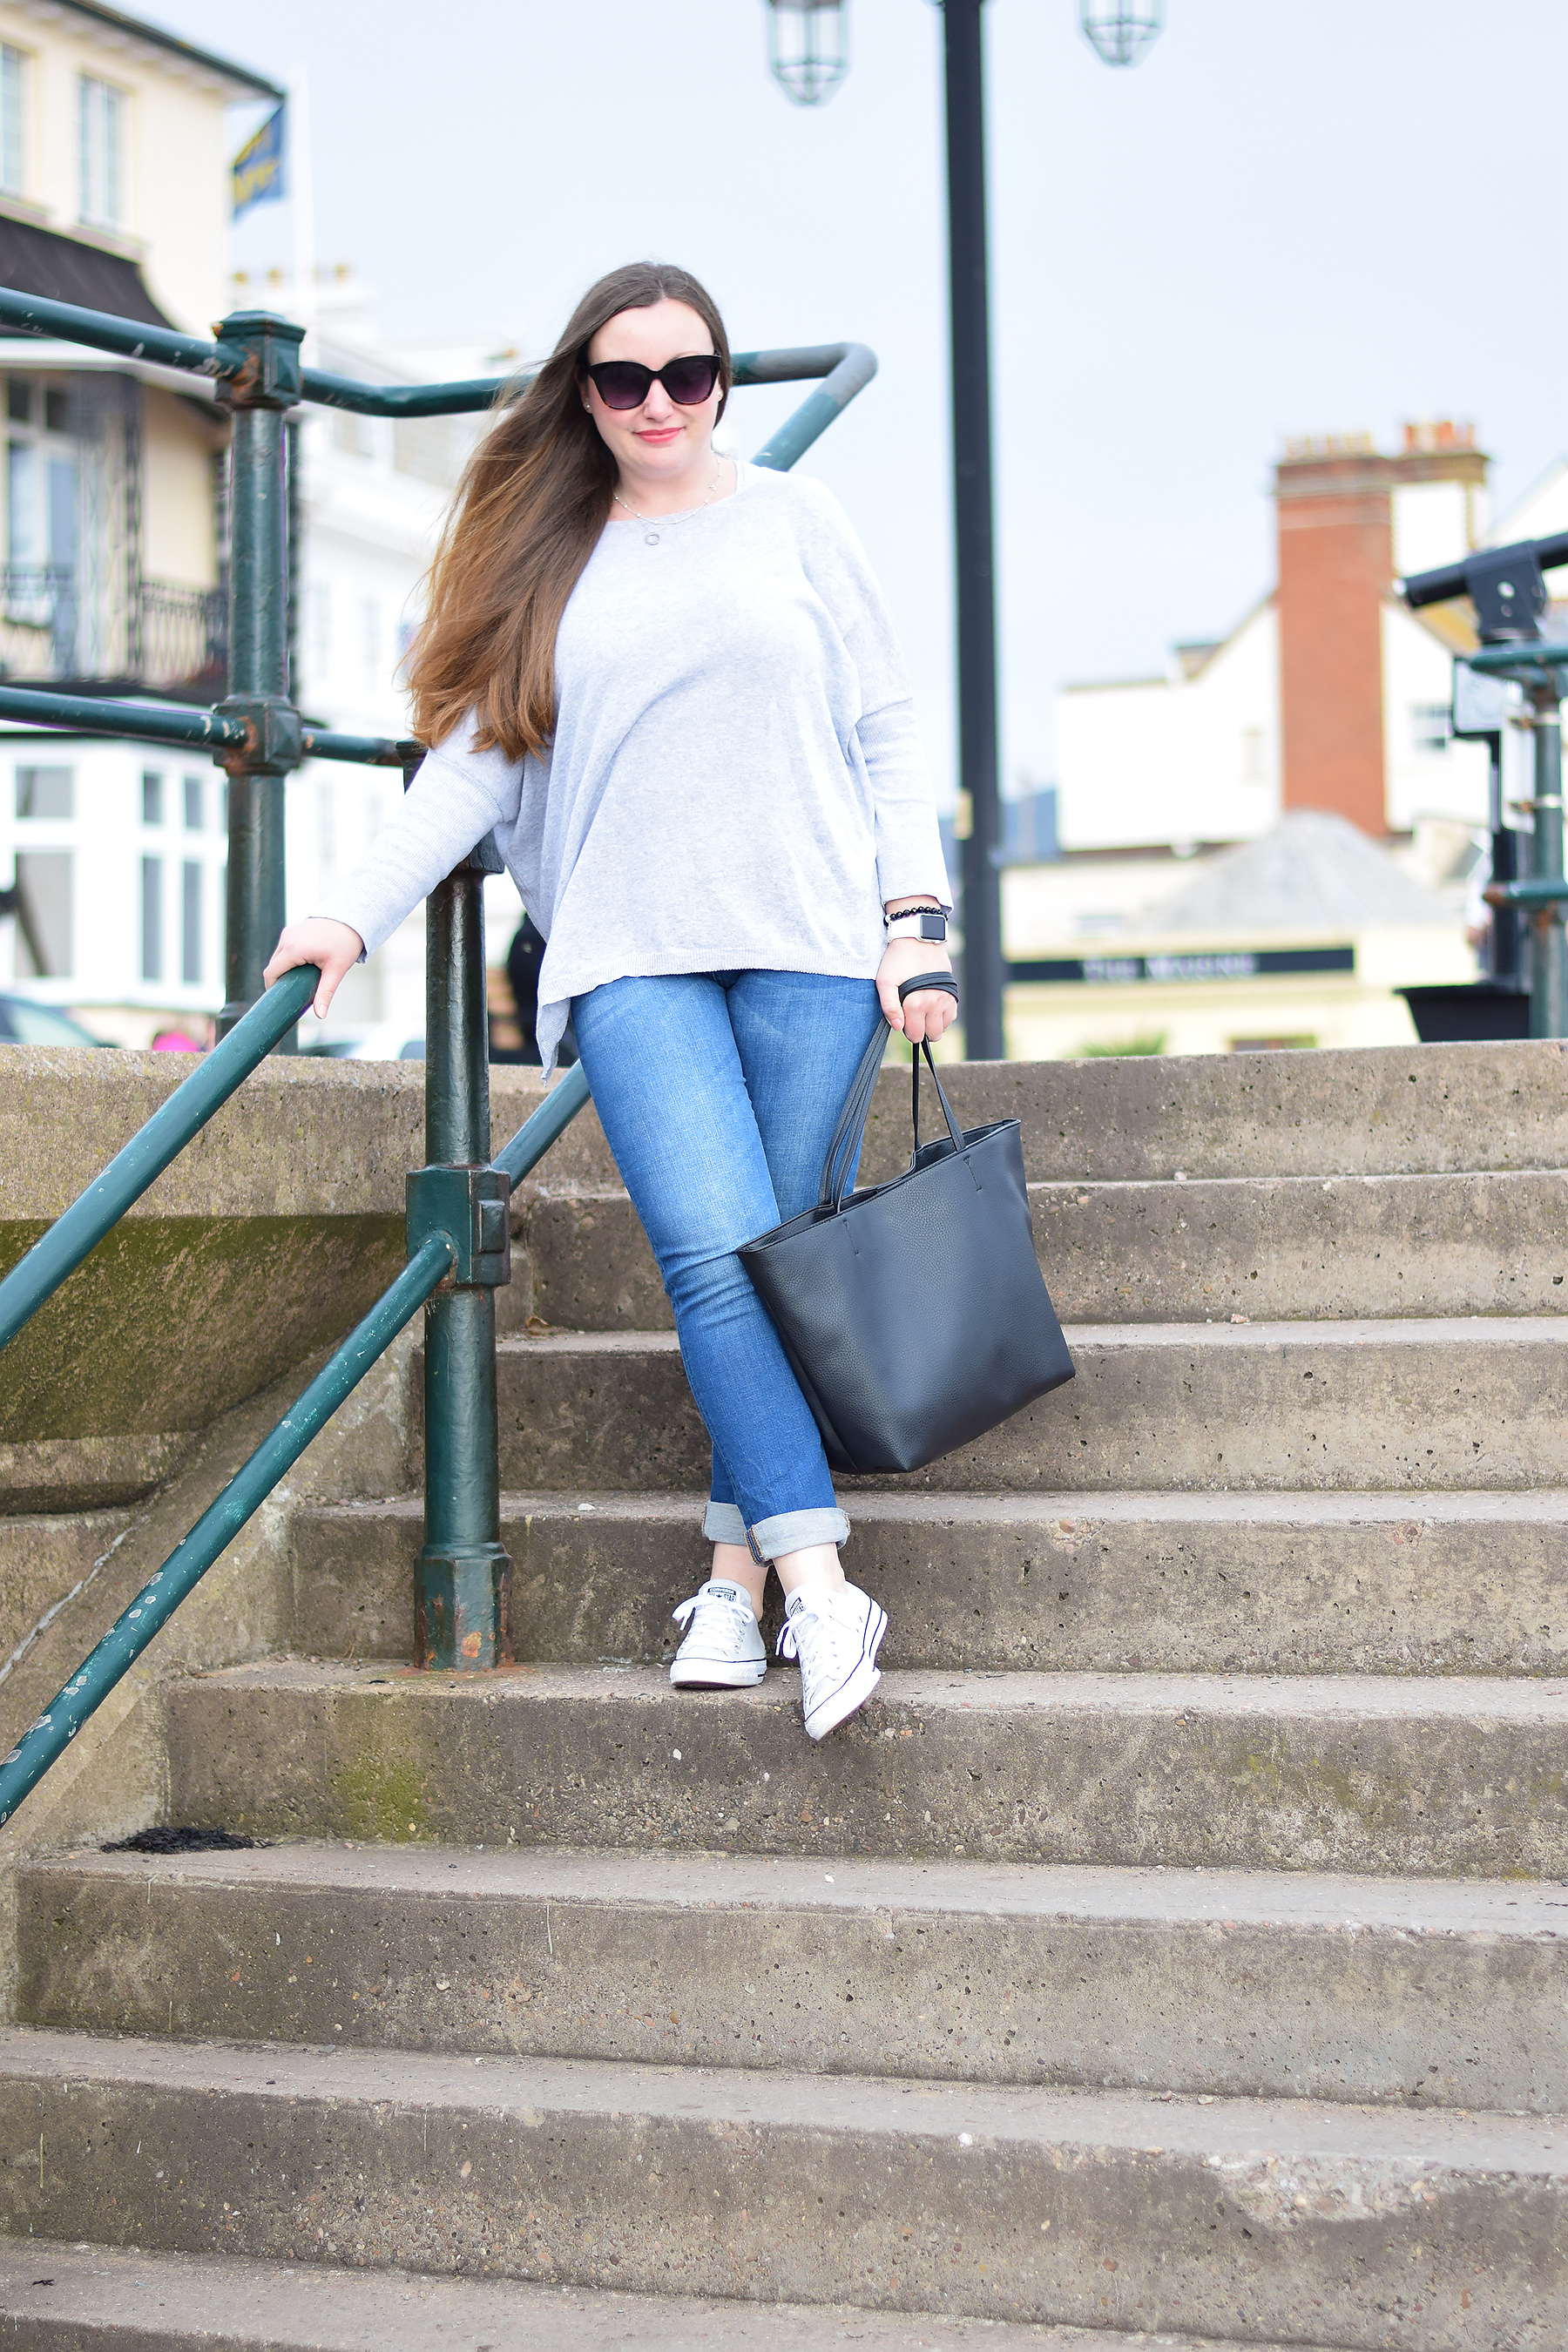 GREY OVERSIZED JUMPER AND BODEN JEANS